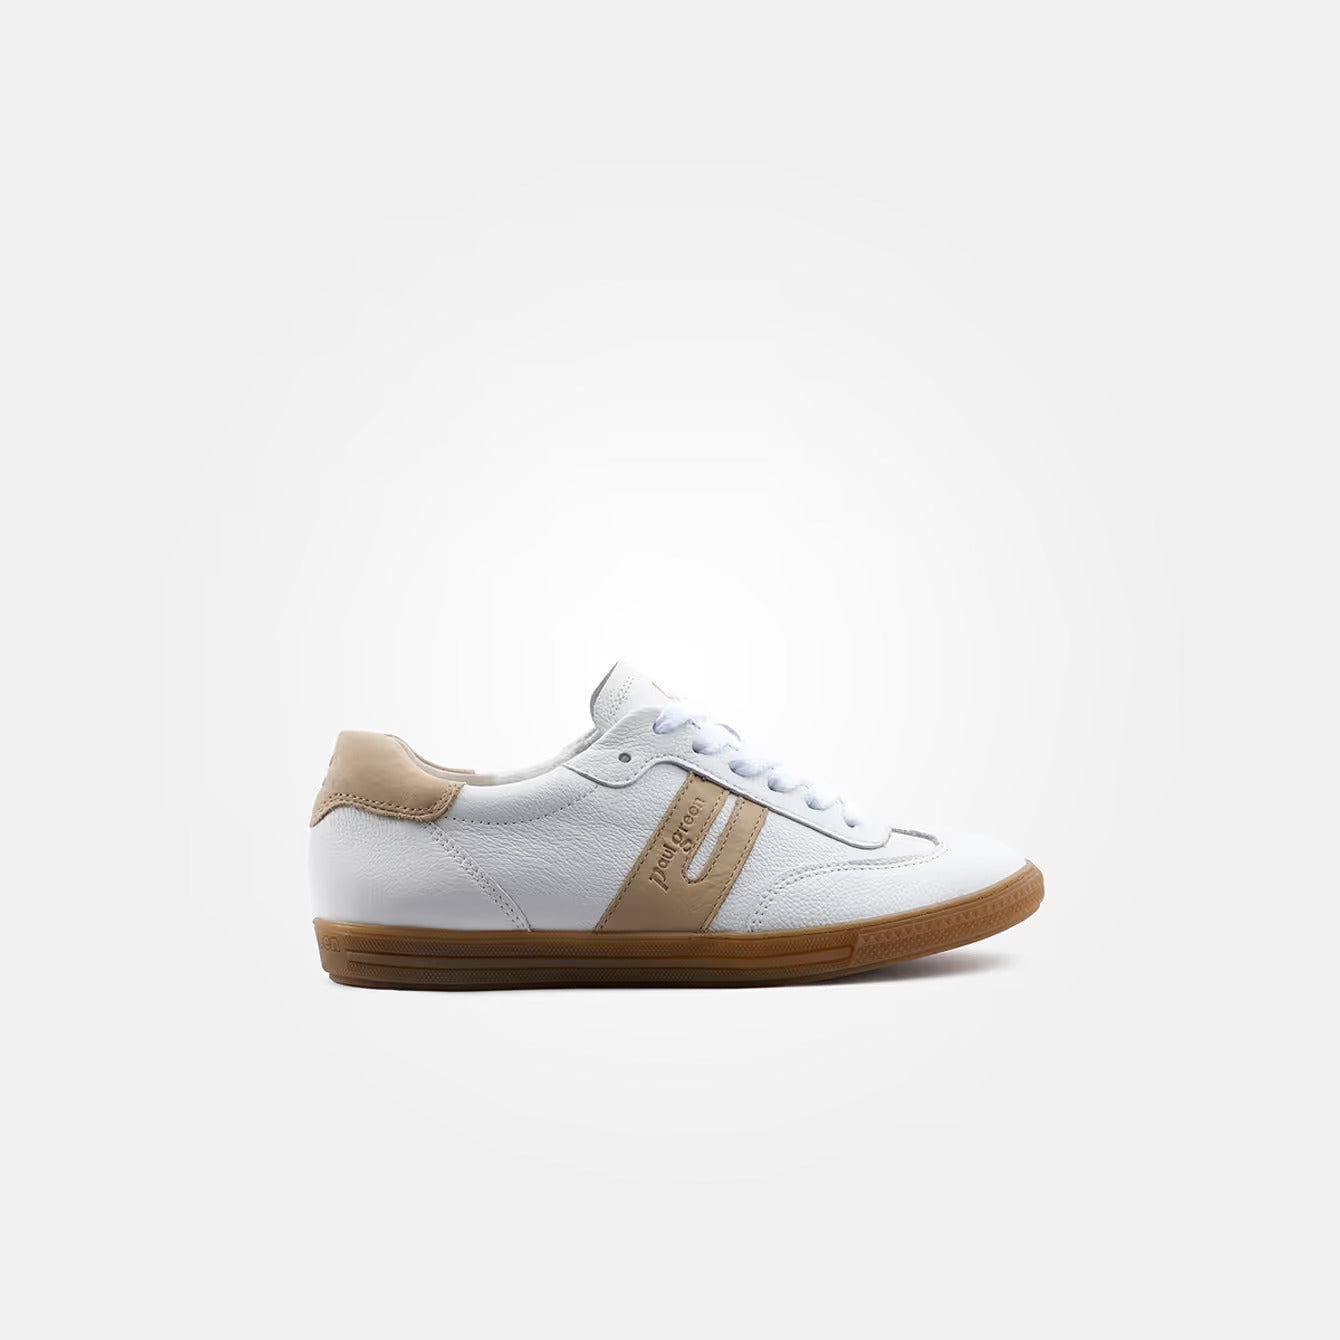 Paul Green White/Beige Trainers With Laces